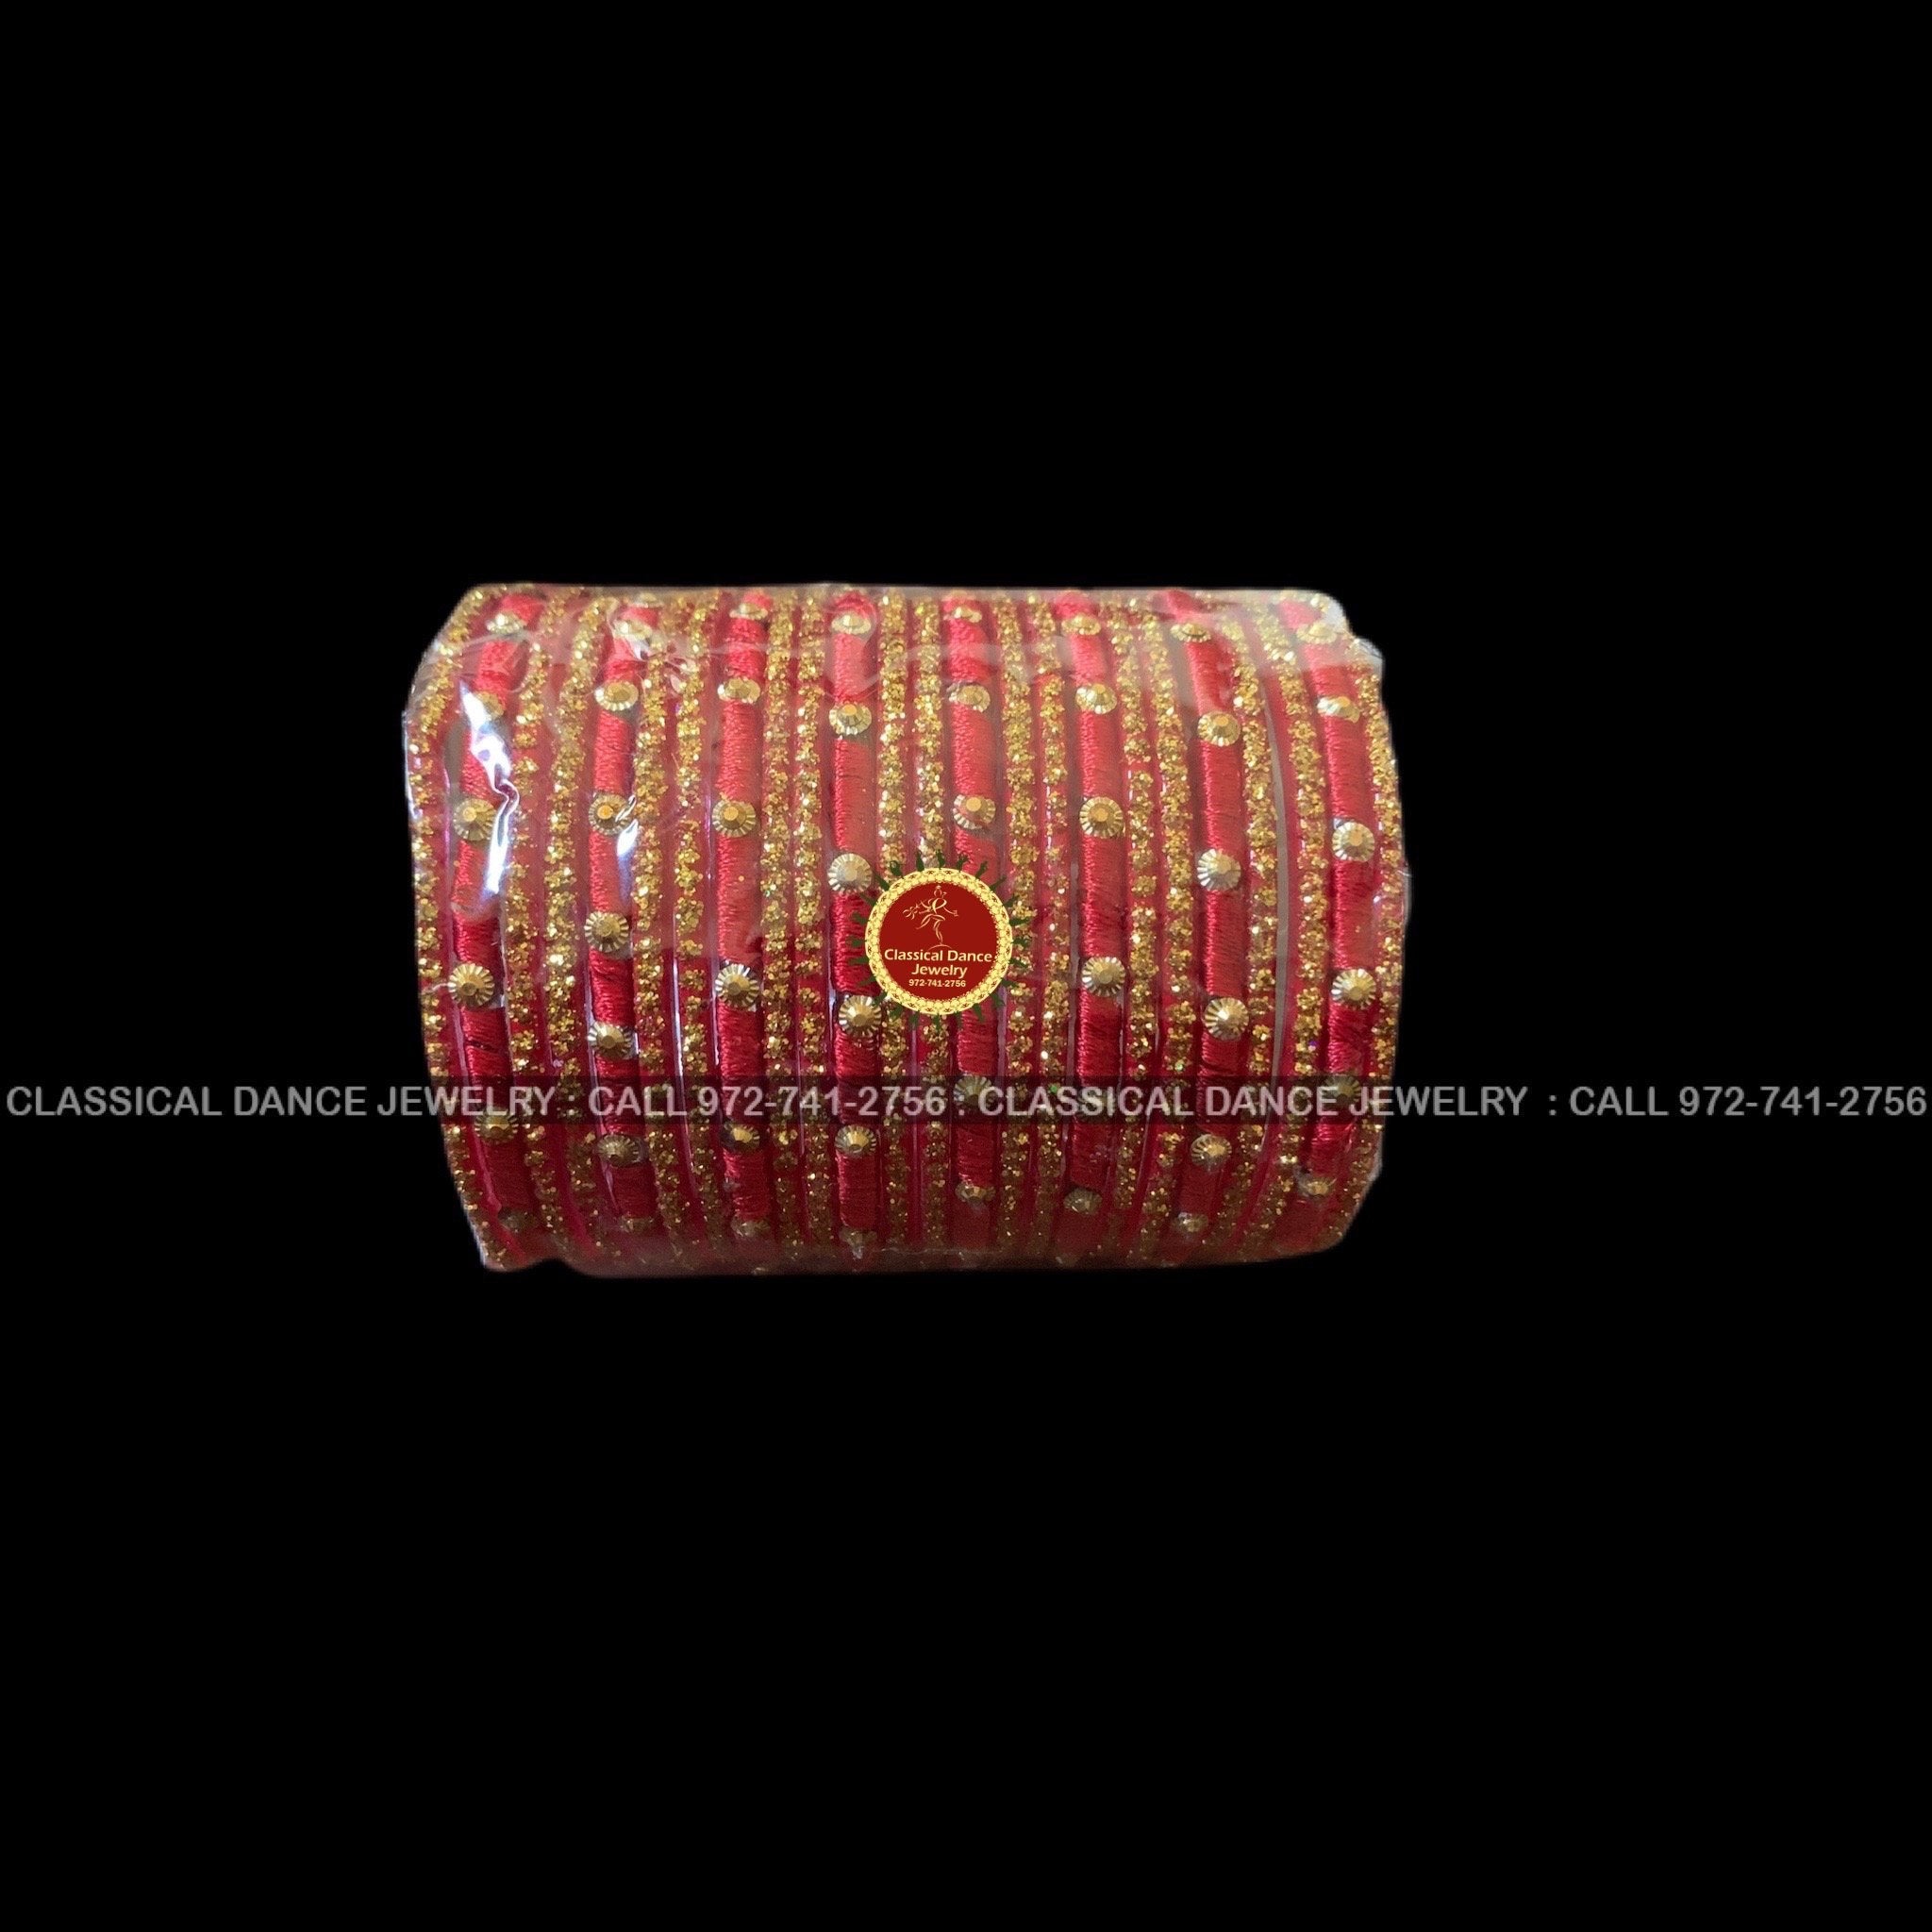 Valley Handicrafts (9*7 Inch) Embroidery Silk Fabric Purse Designer Hand  Bags With Handle For Women / Best Gifts Favours - Mix Colour, 10,  हस्तनिर्मित डिजाइनर बैग - Valley Traders, Jaipur | ID: 2851327407733